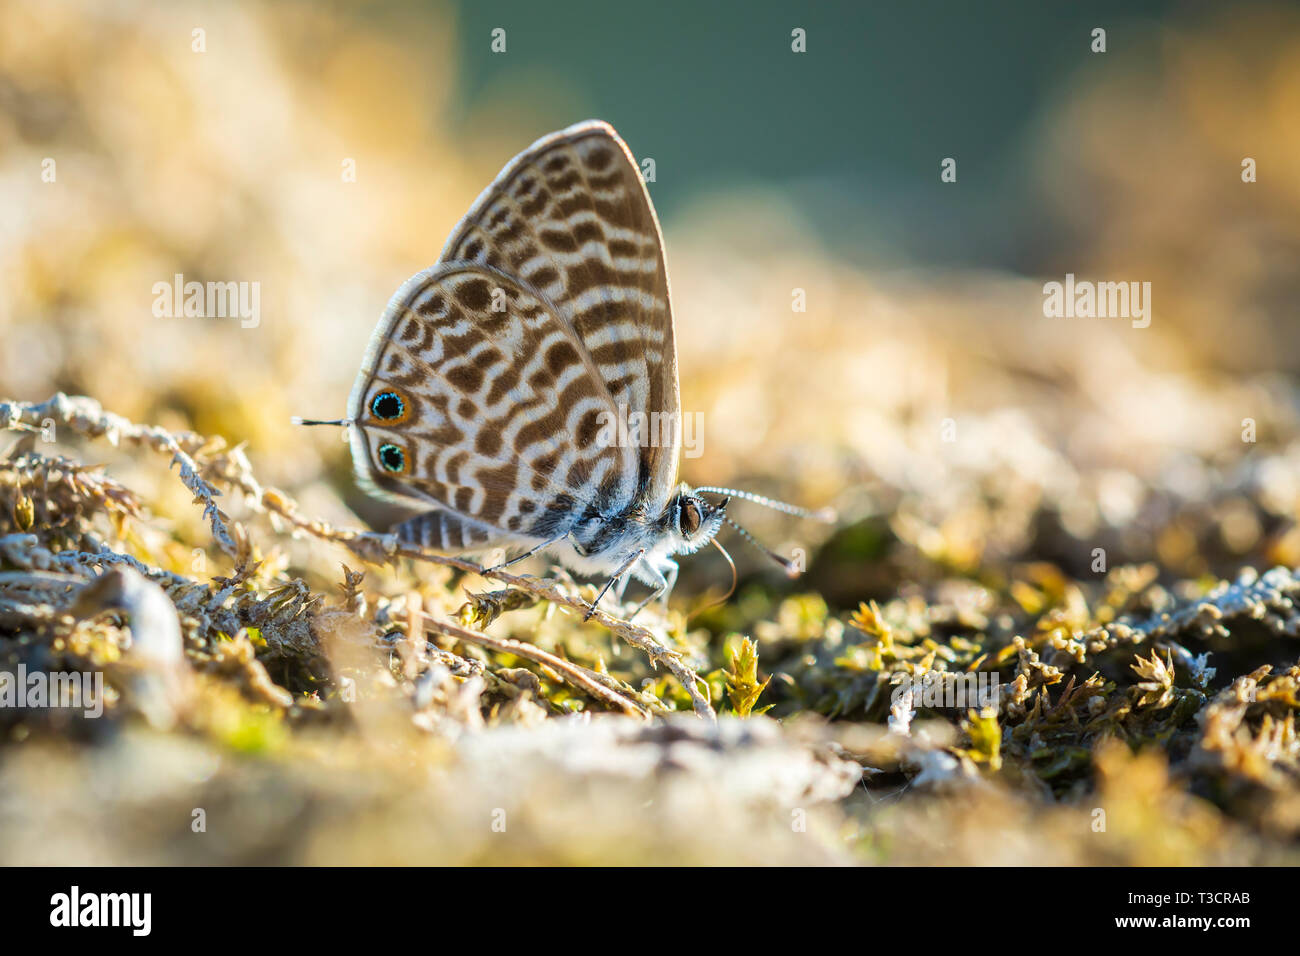 pea blue or long-tailed blue butterfly, Lampides boeticus, resting in a meadow Stock Photo